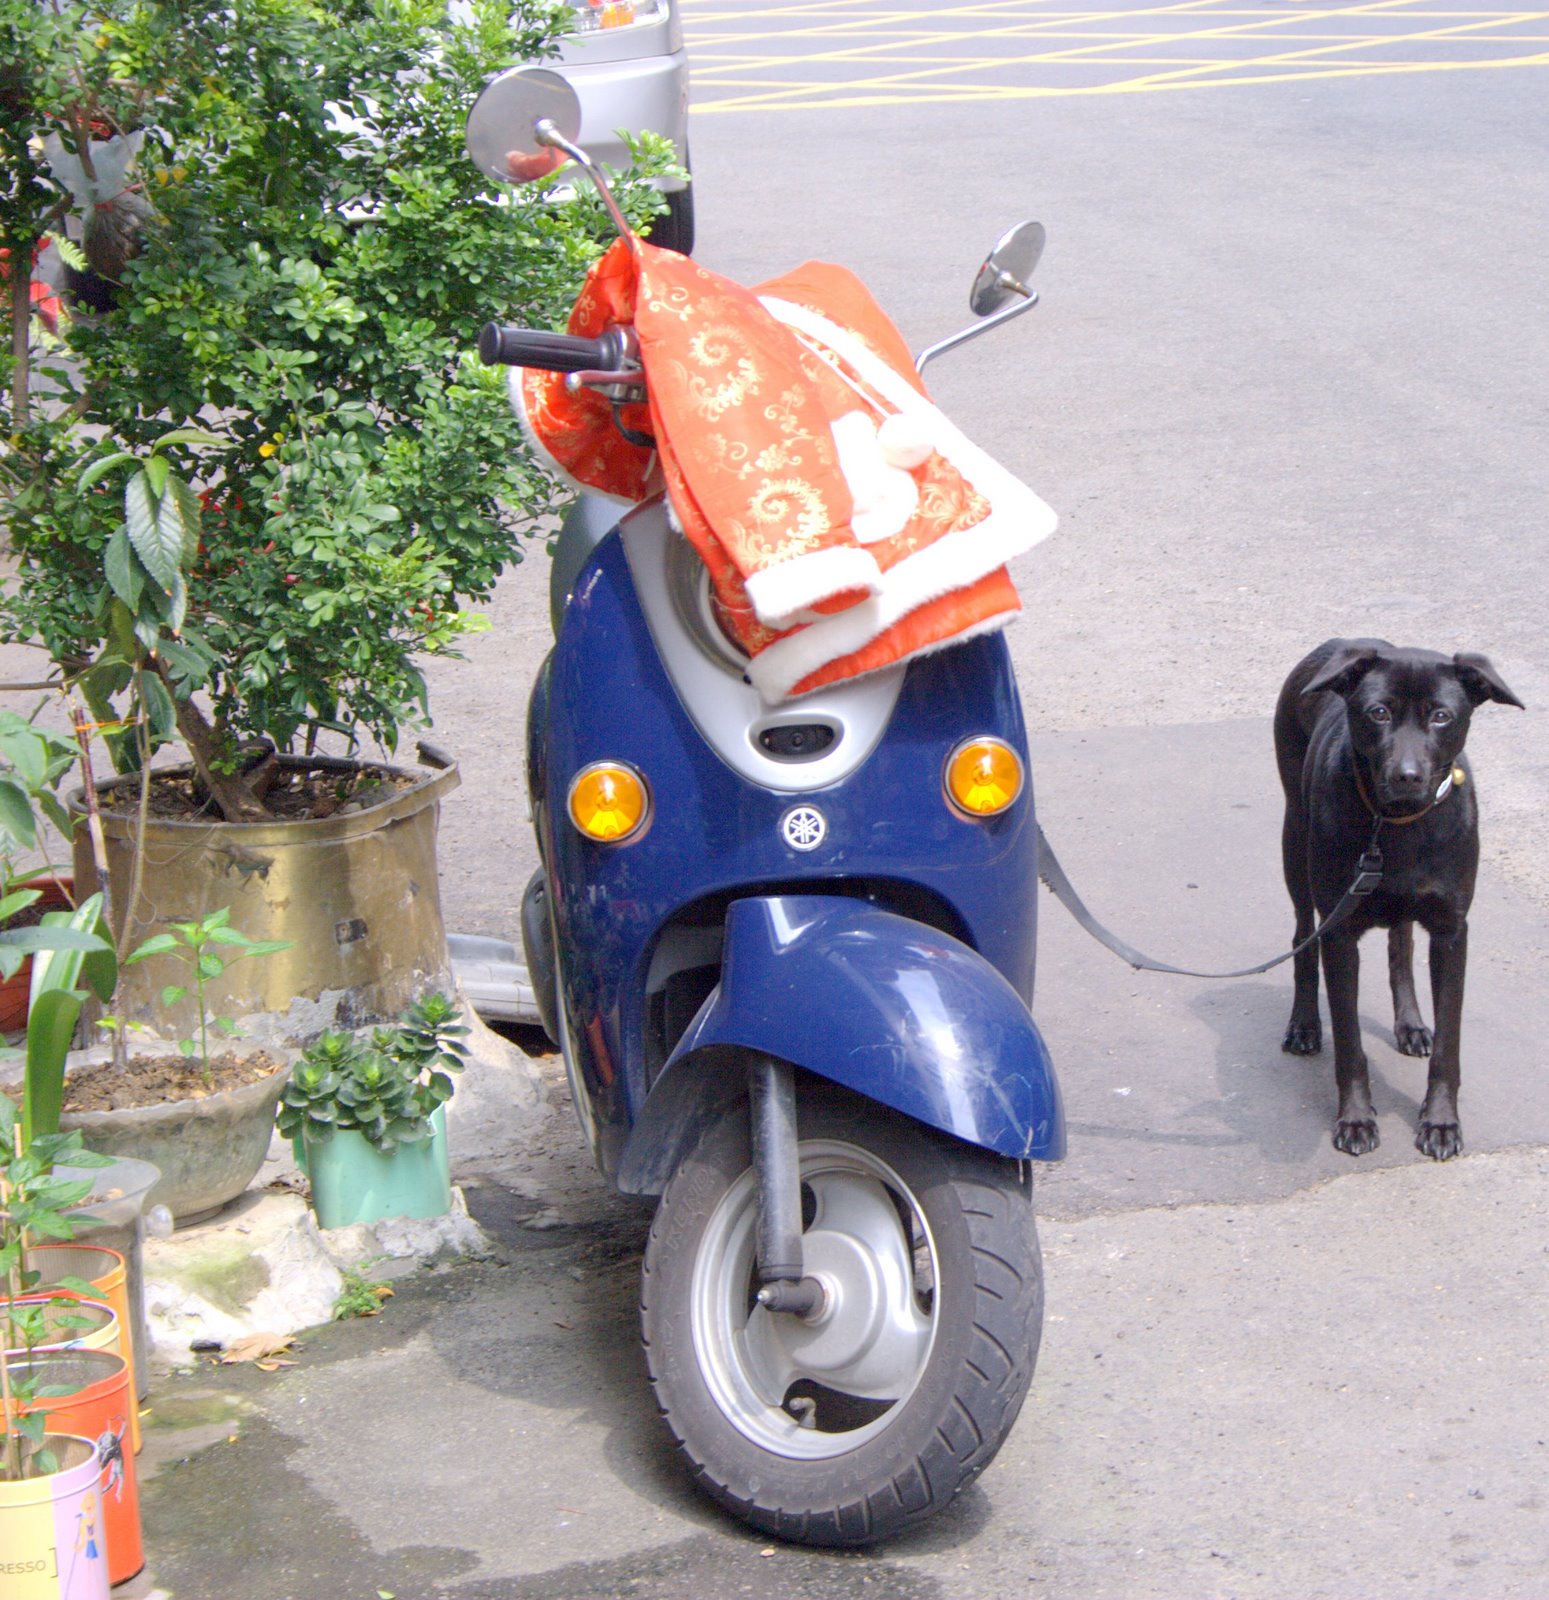 [Dog+and+Scooter+-+Taiwan.jpg]